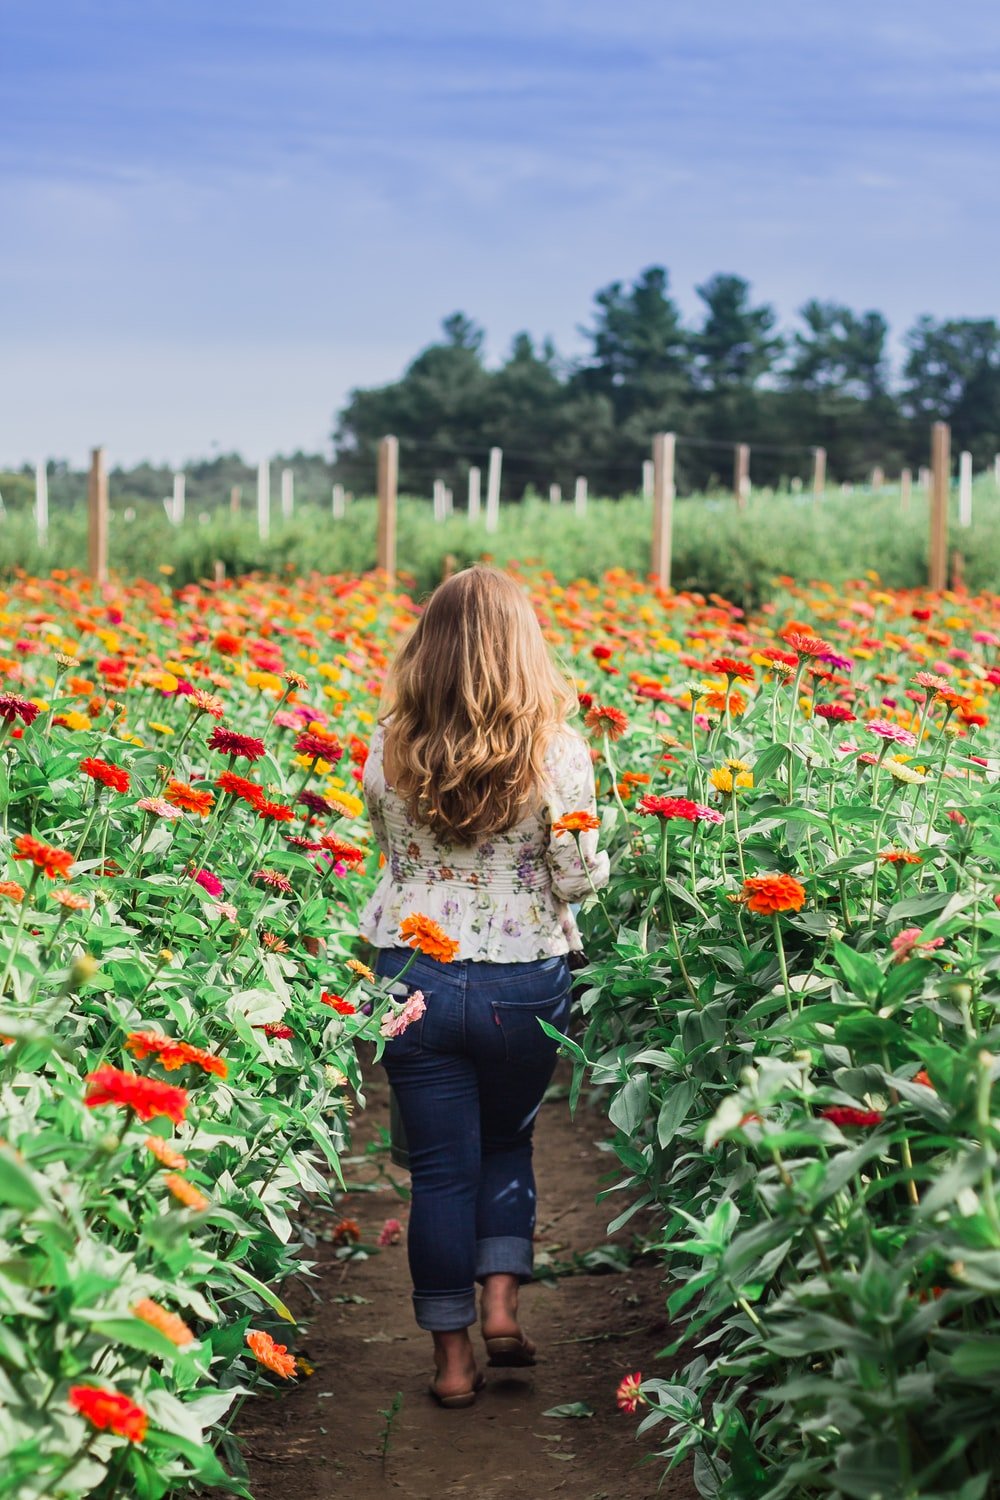 Flower Farm Picture. Download Free Image